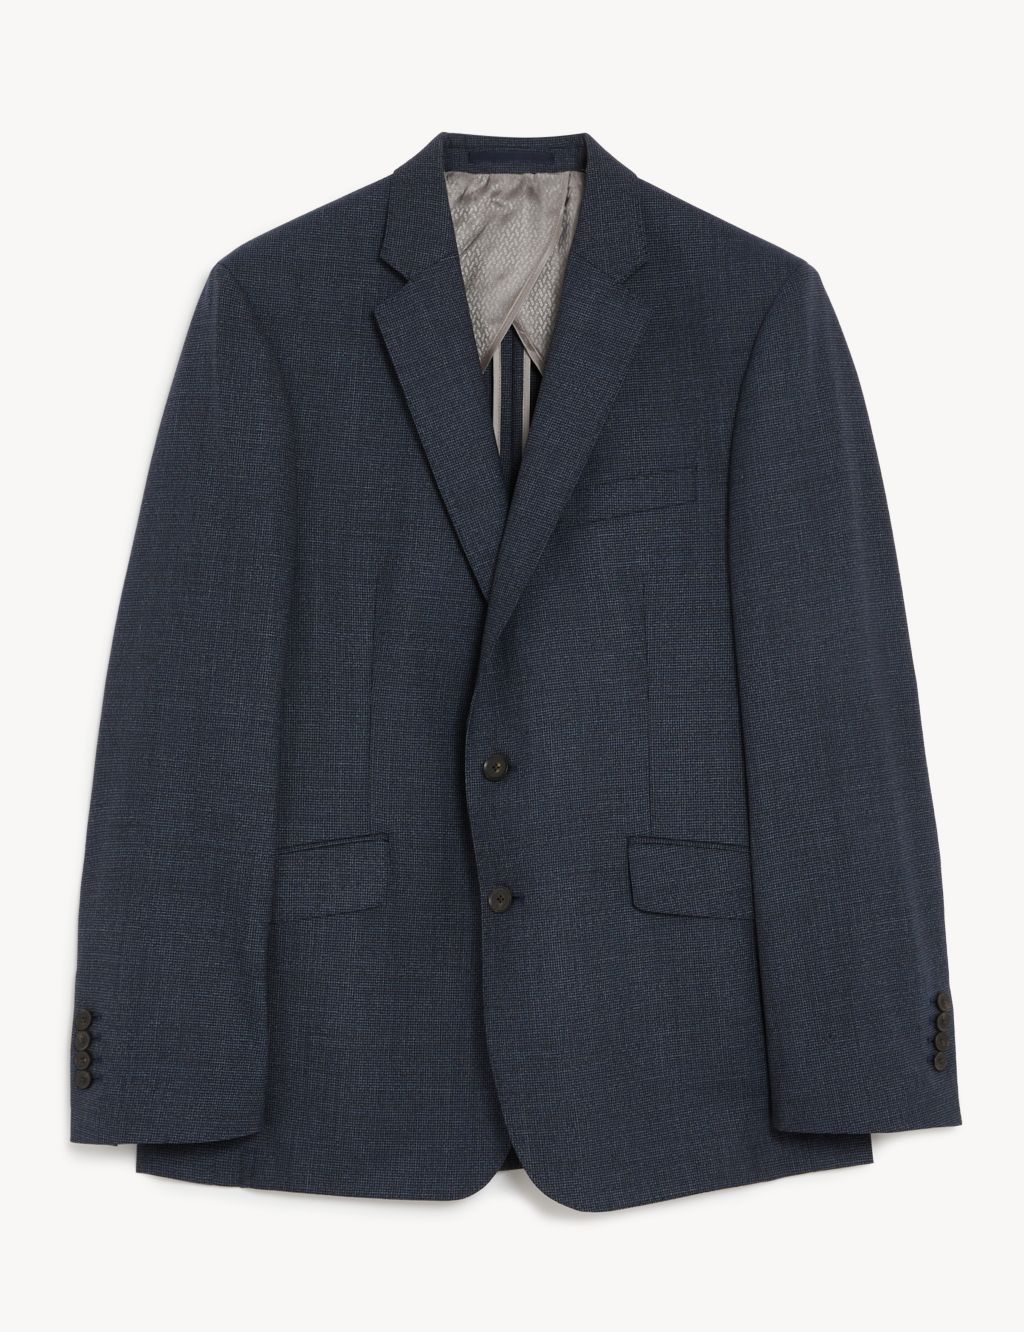 Tailored Fit Bi-Stretch Puppytooth Jacket image 2